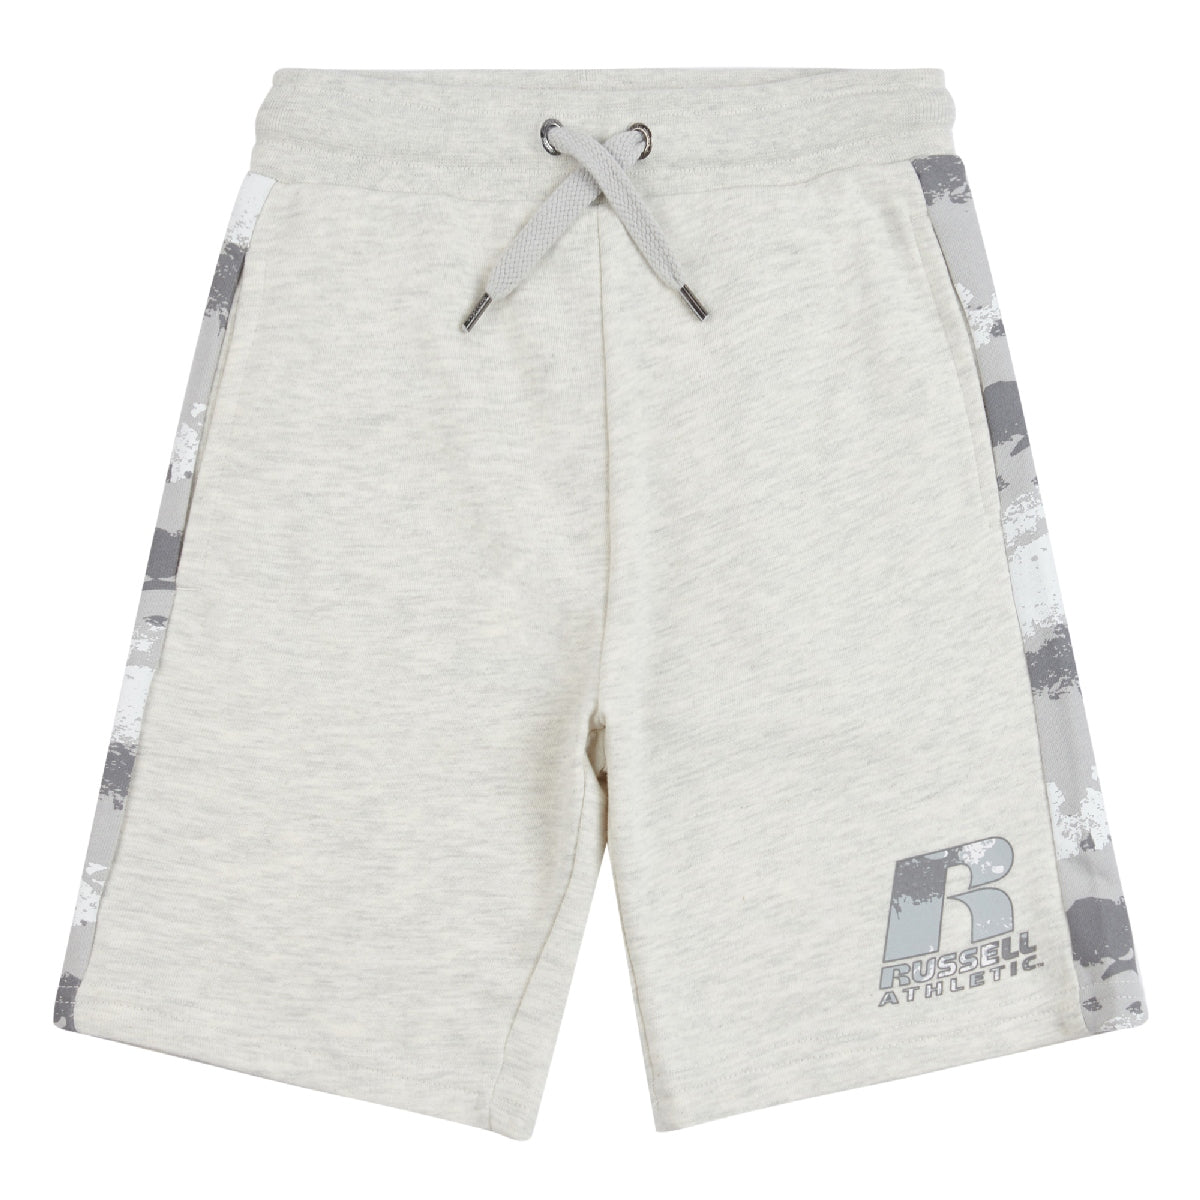 Russell Athletic Camo Shorts